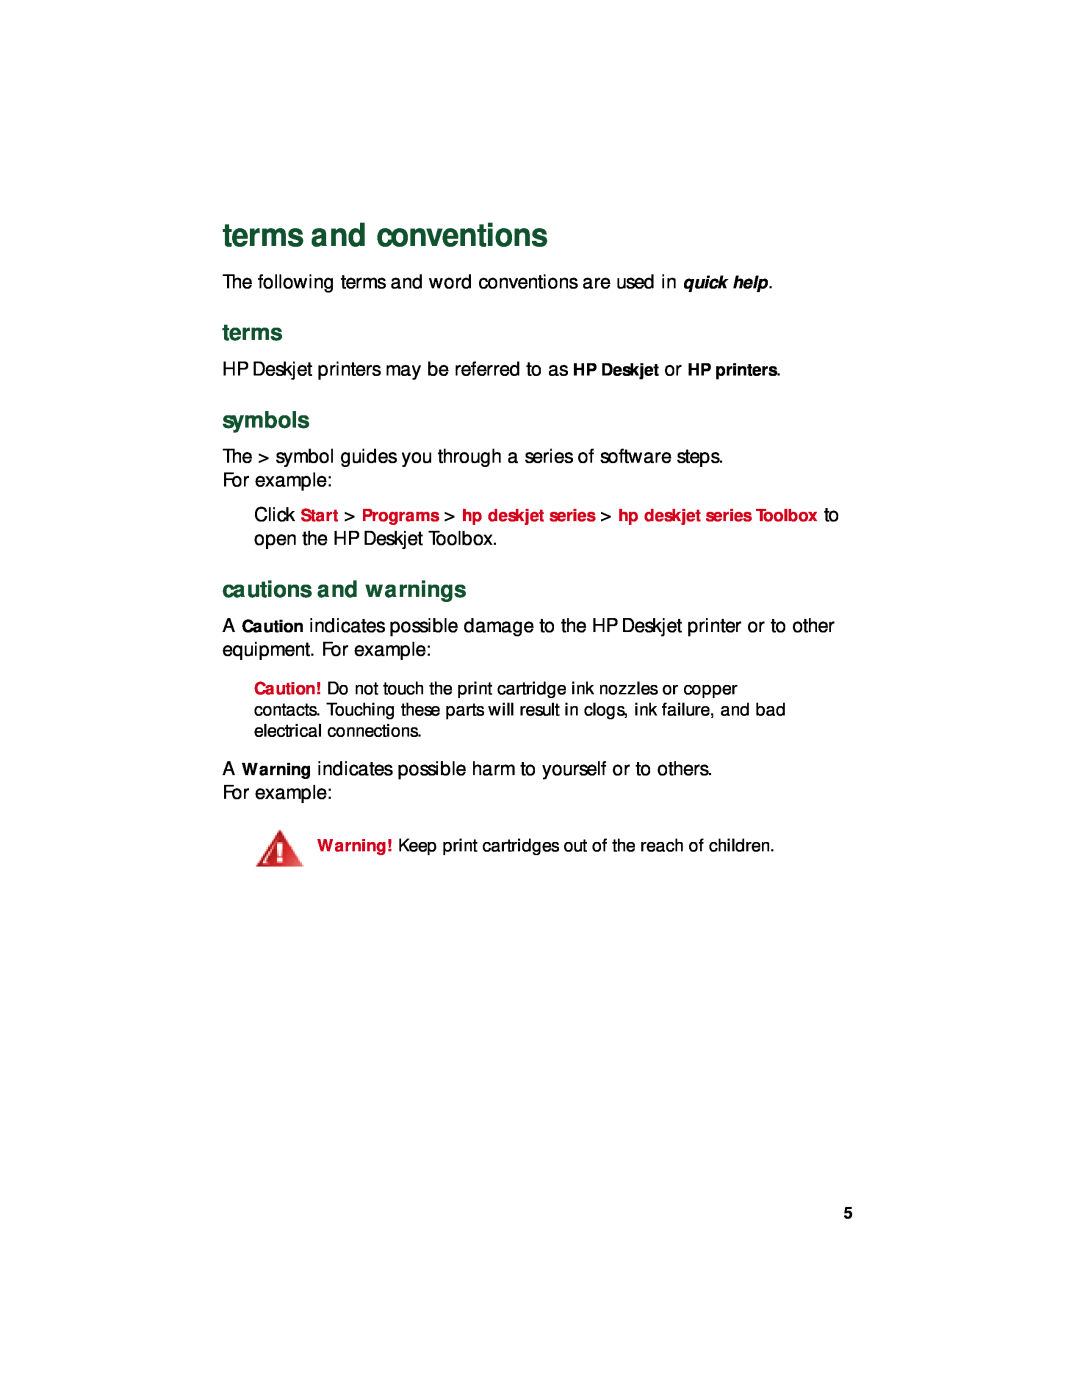 HP 948c, 920c, 940c manual terms and conventions, symbols, cautions and warnings 